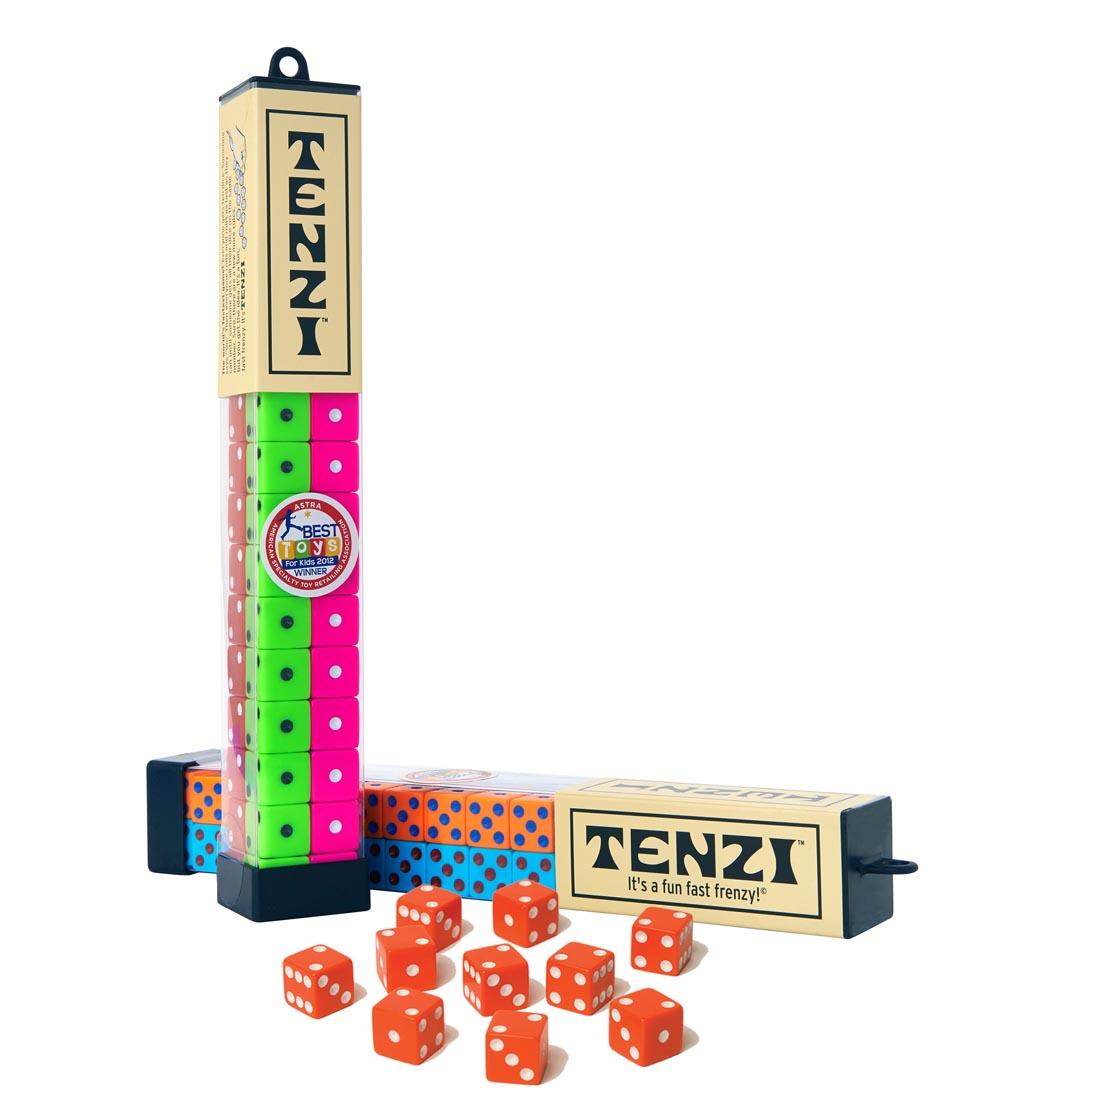 Two Tenzi Dice Game Packages Plus 6 Dice